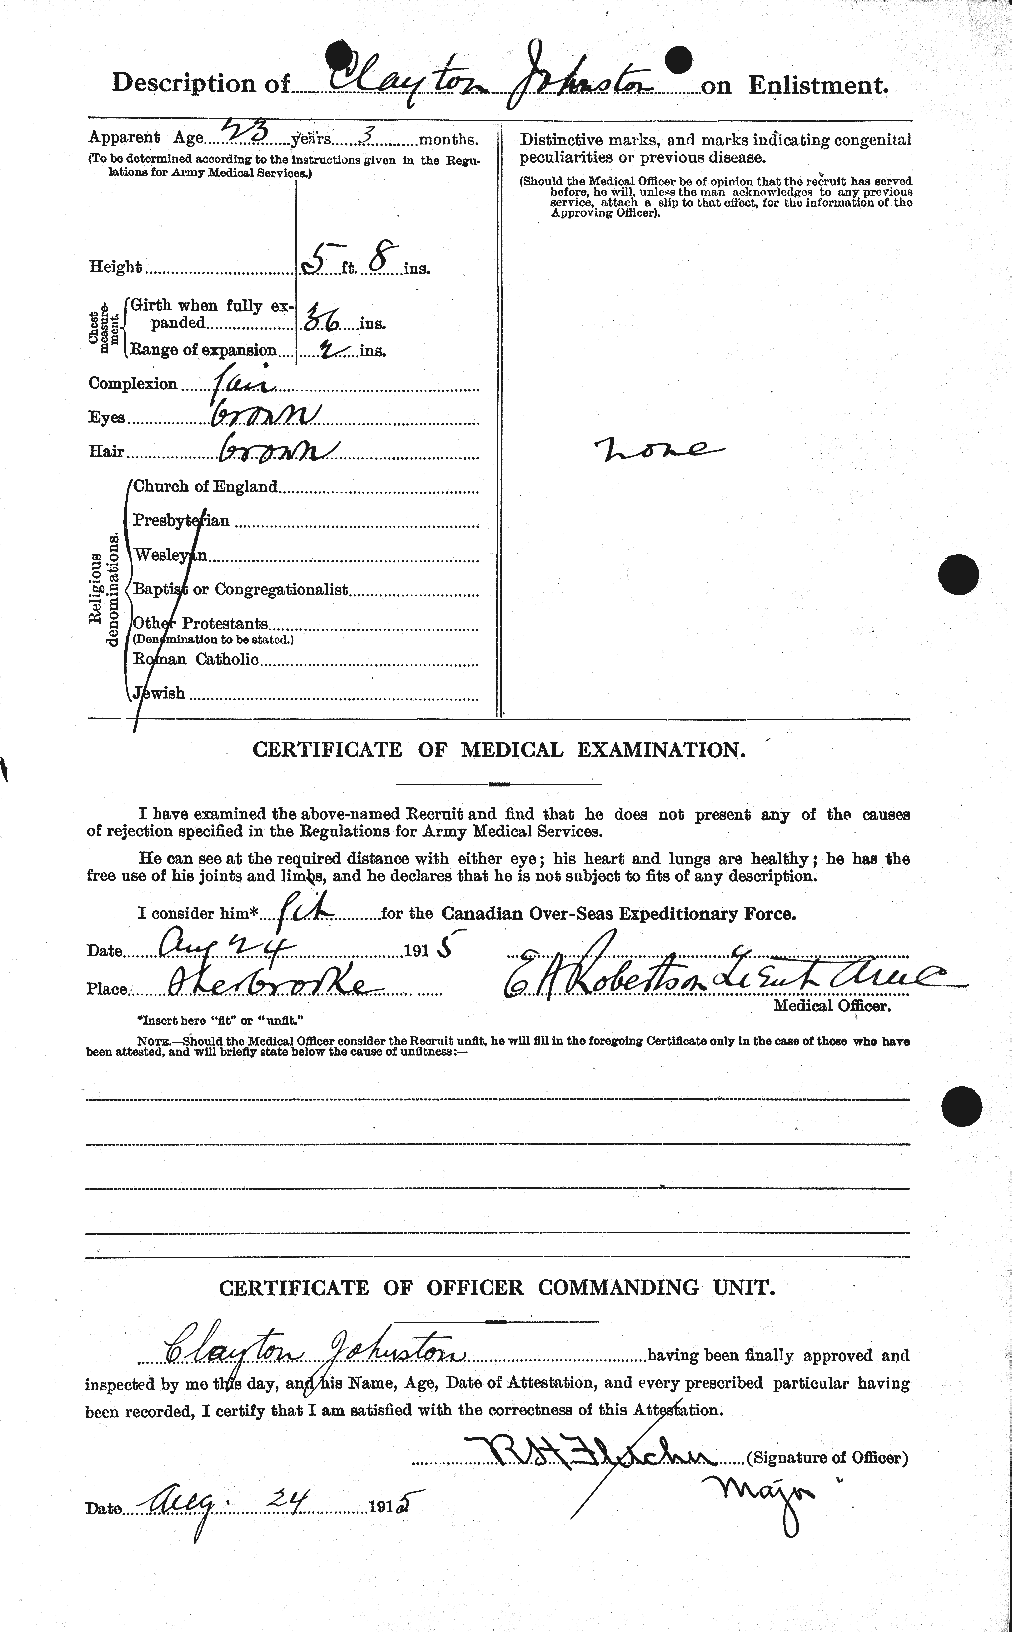 Personnel Records of the First World War - CEF 423138b